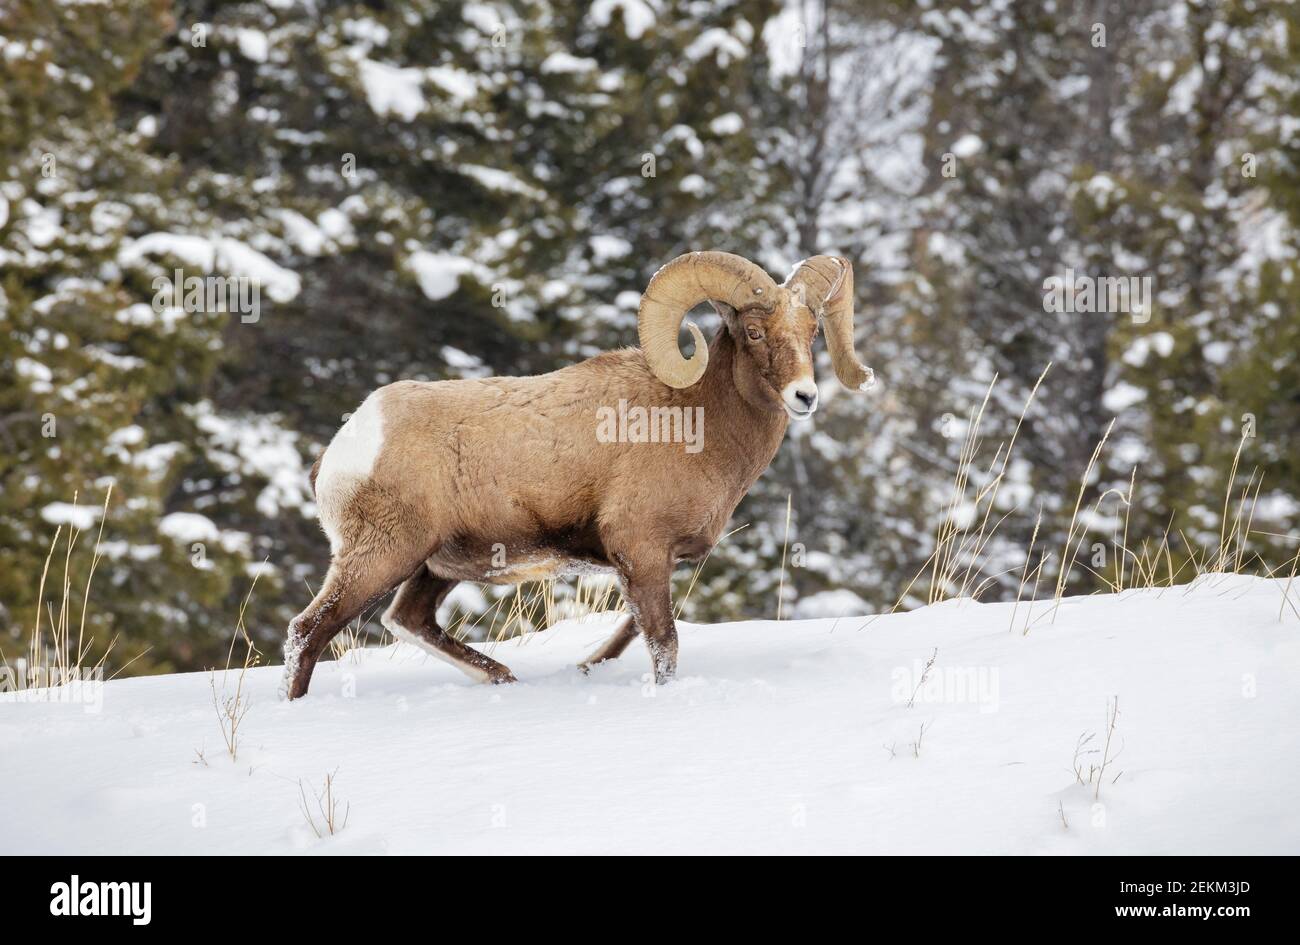 Parco Nazionale di Yellowstone, Wyoming: Bighorn RAM (Ovis canadensis) in inverno Foto Stock